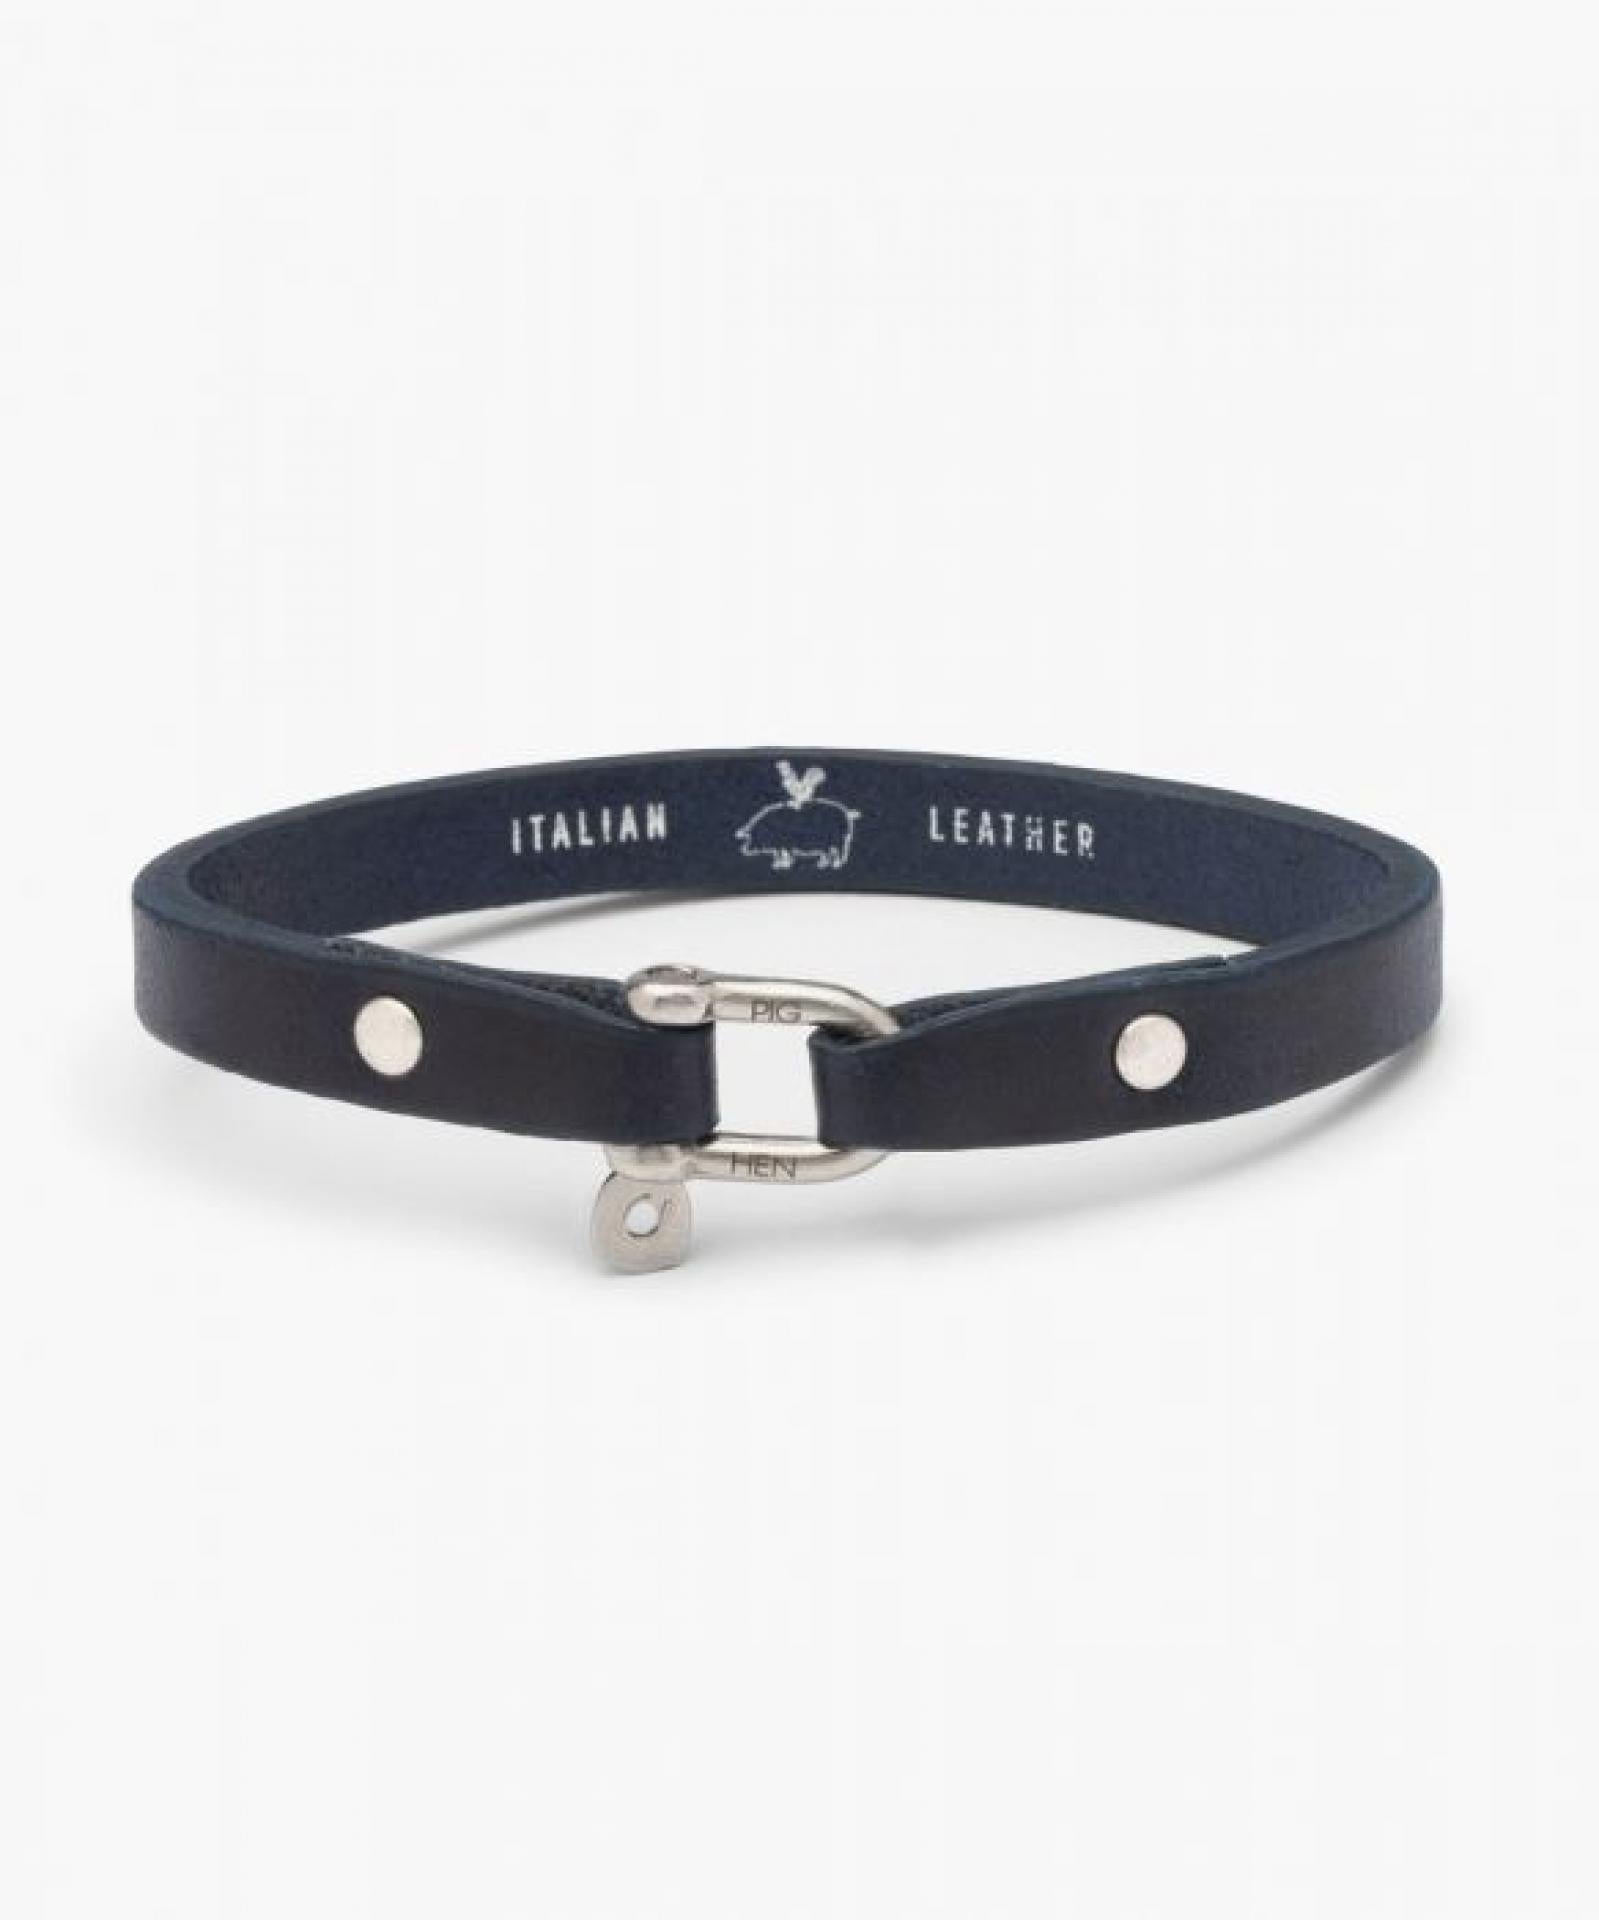 Pig&Hen Vicious Vik Leather Navy/Silver M